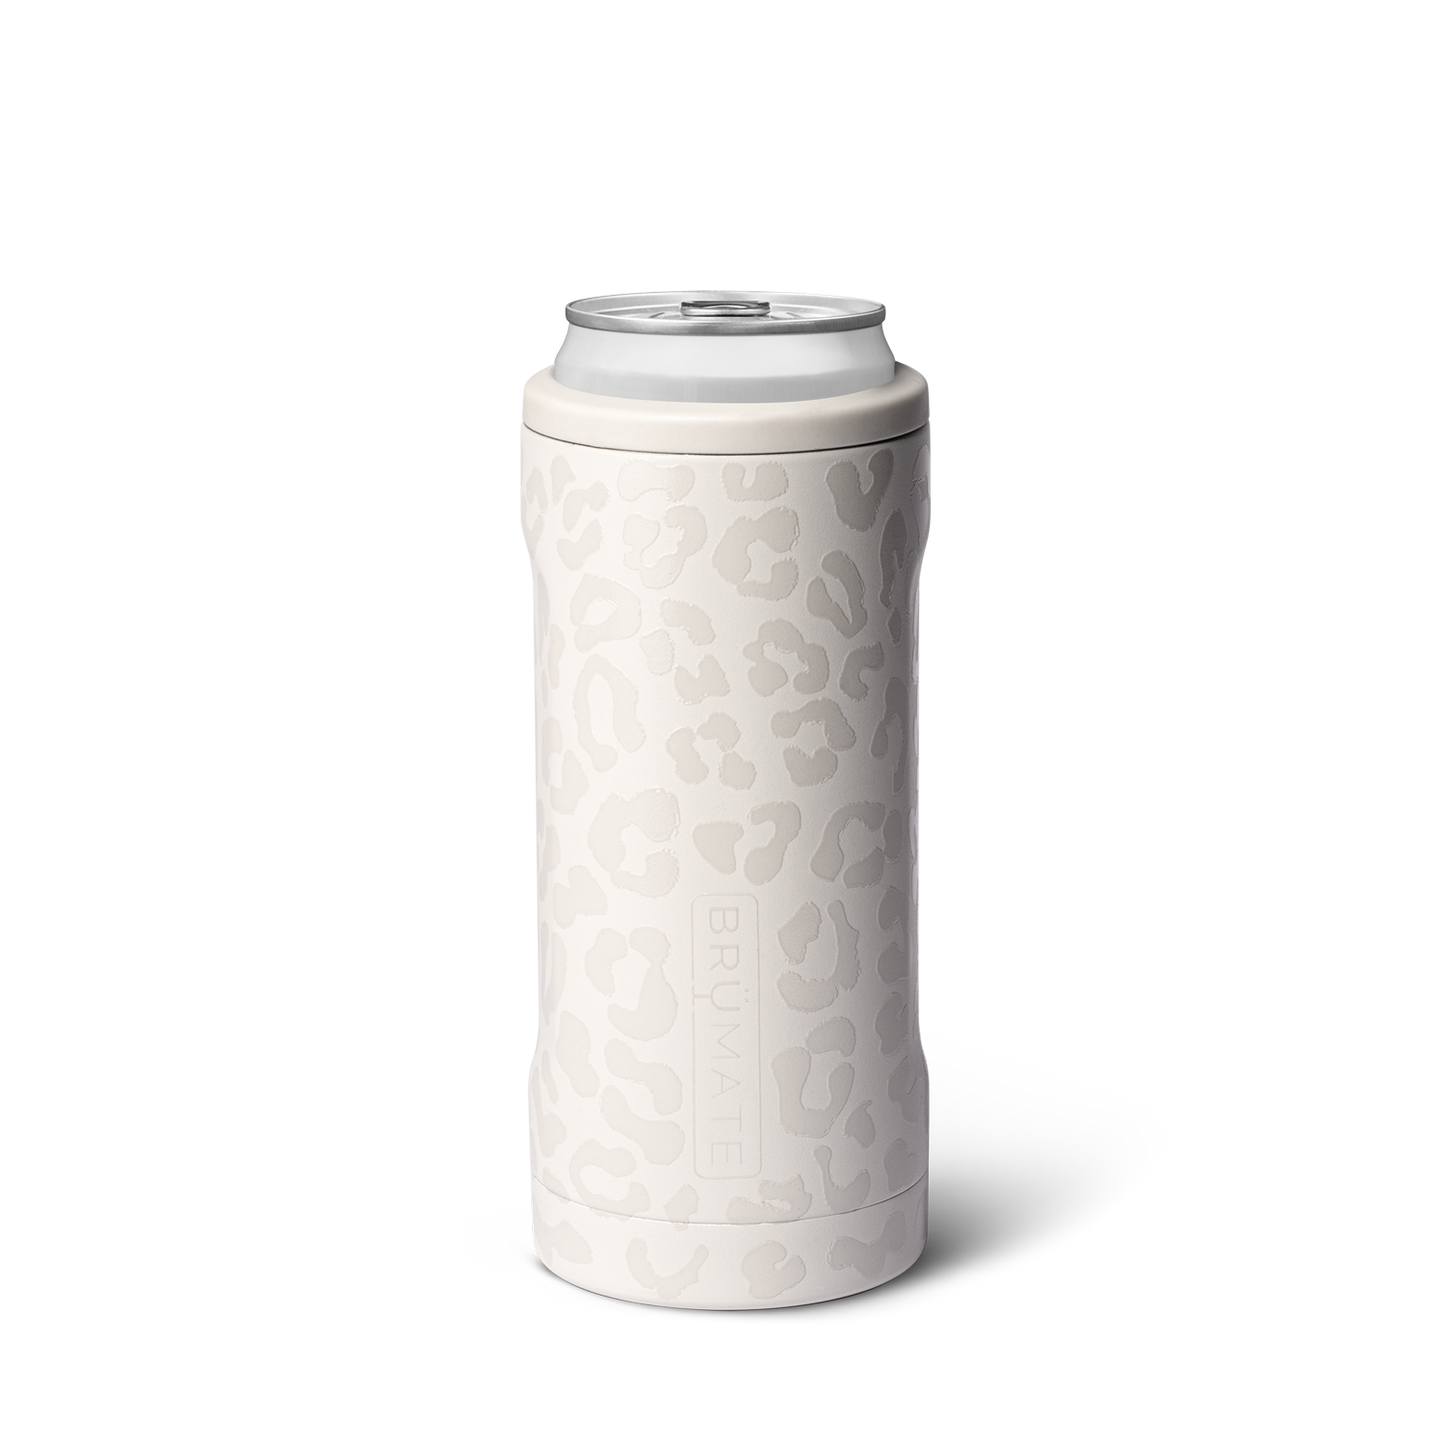 limestone leopard hopsulator slim can cooler is white with gray leopard spots all over against a white background